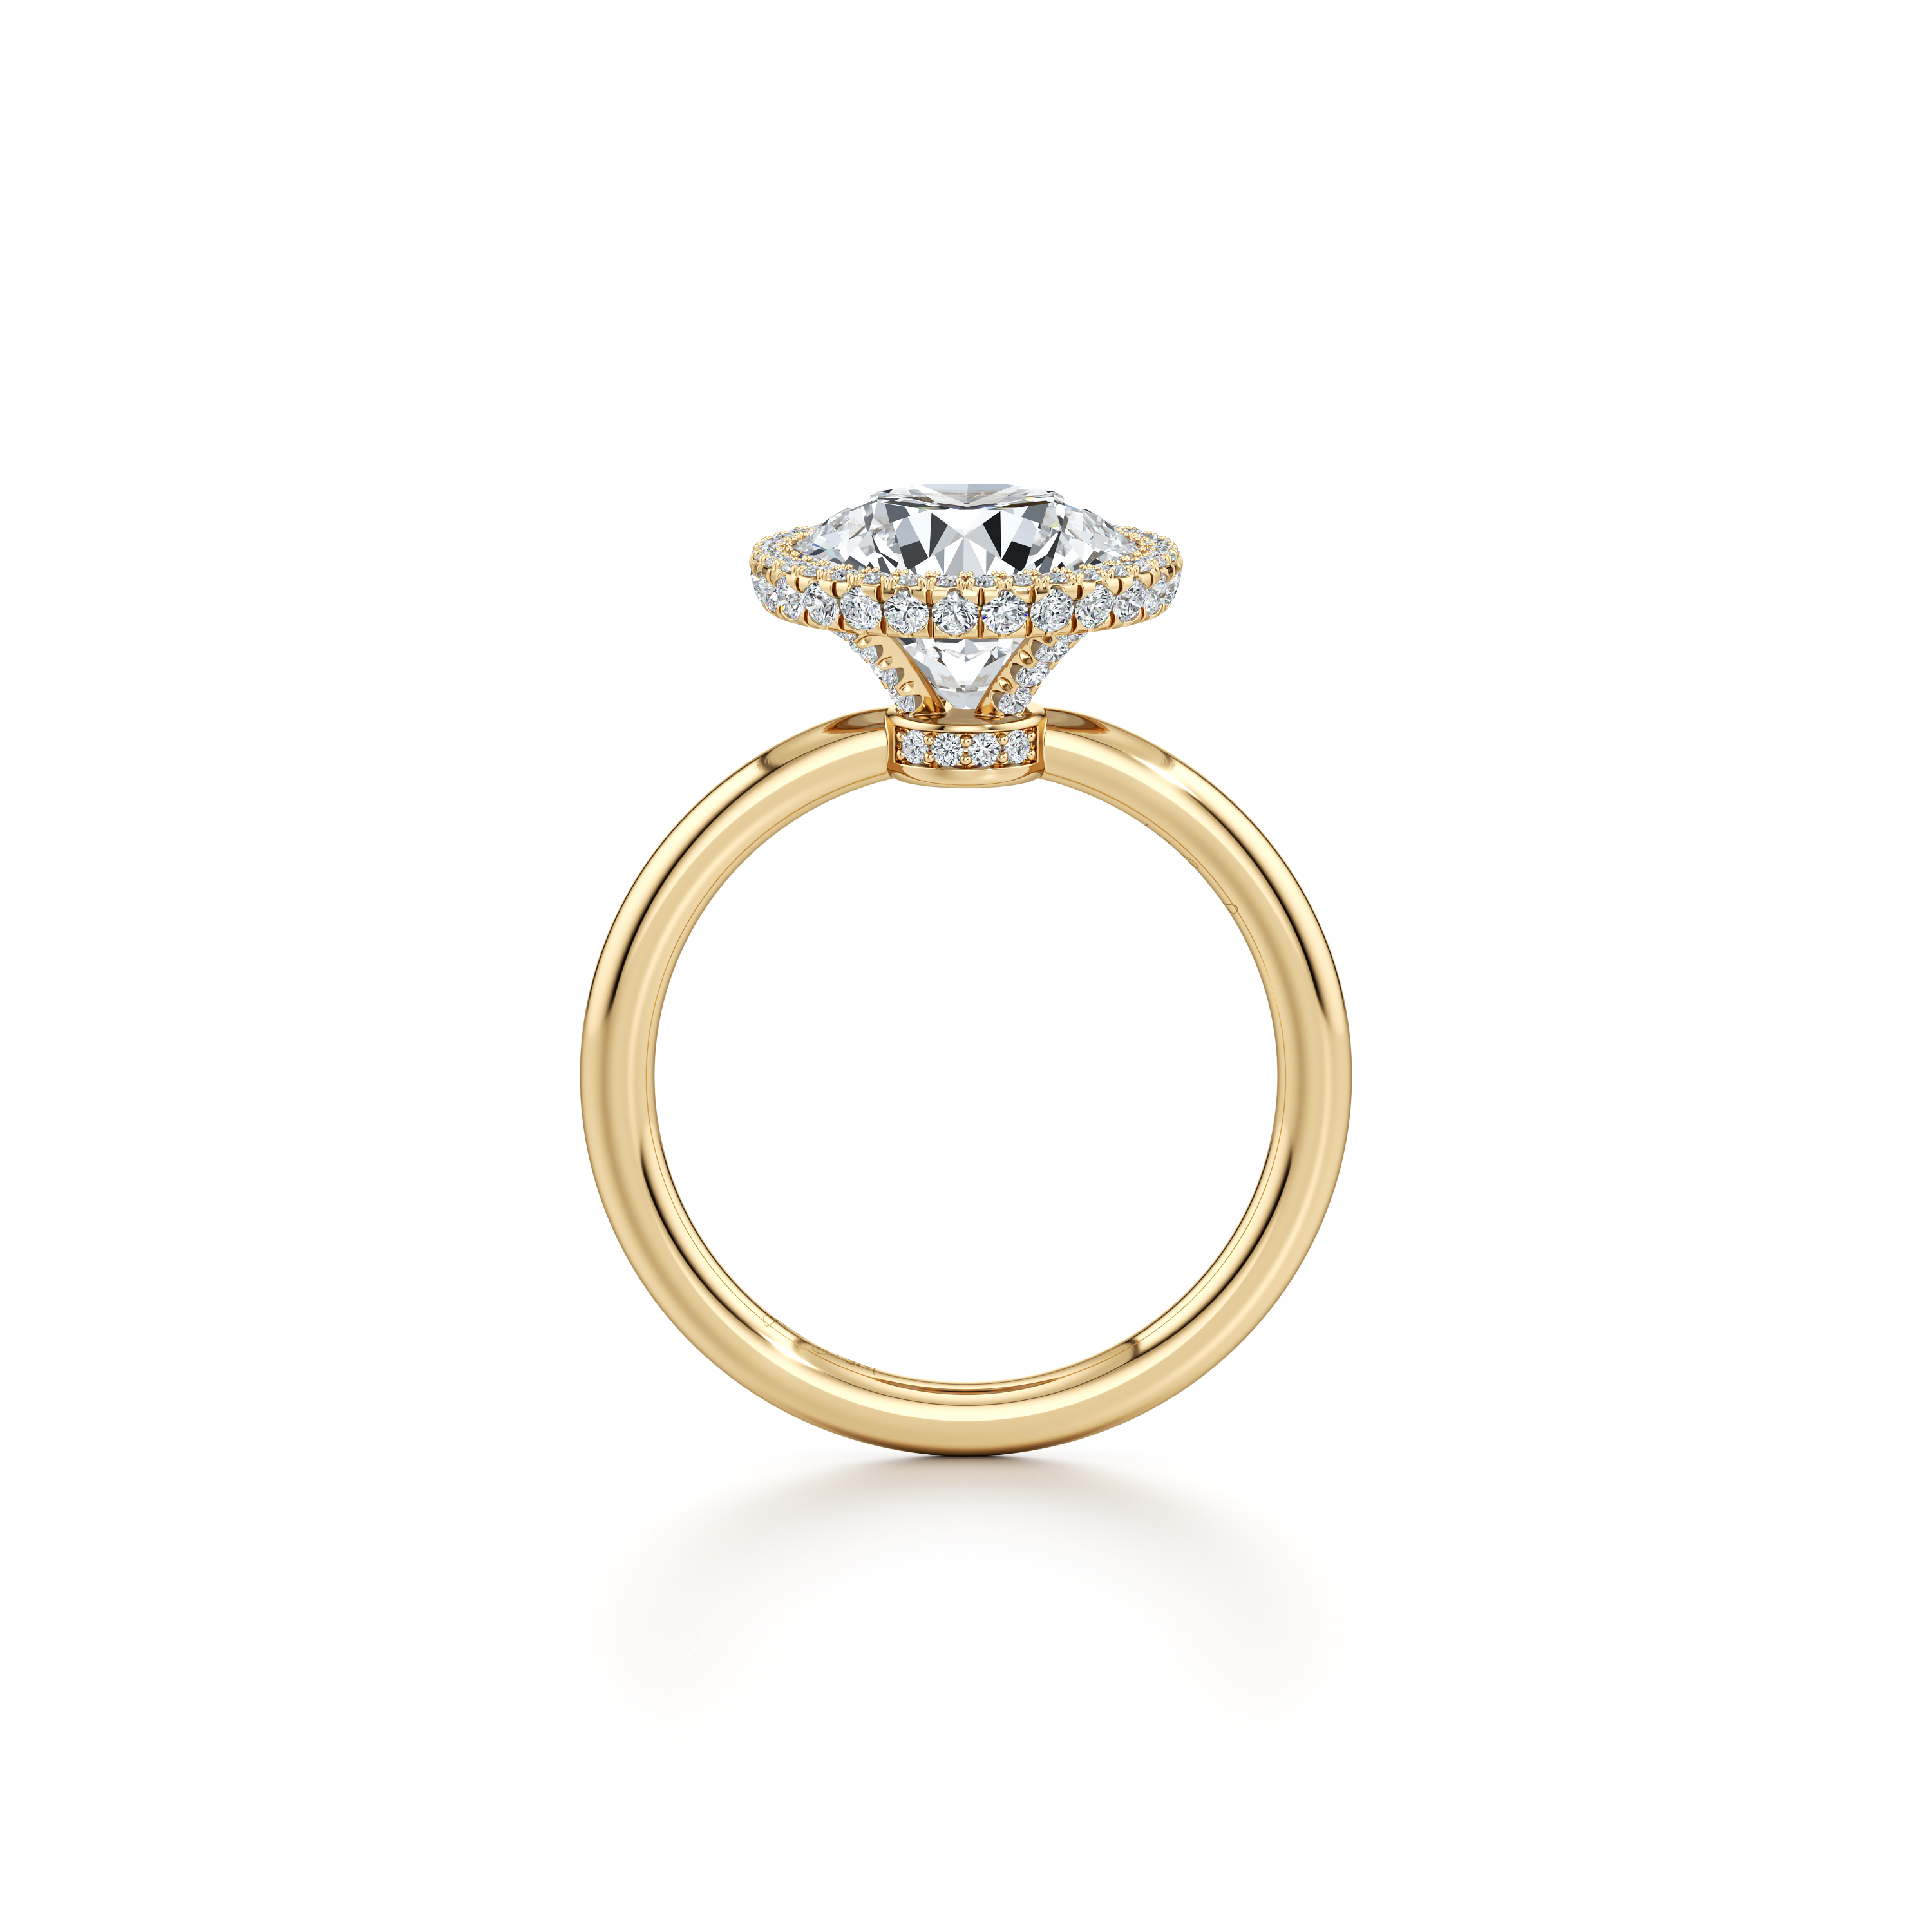 Shop Unique Designer Lab Diamond Engagement Rings And Fine Jewelry -  SHEfinds